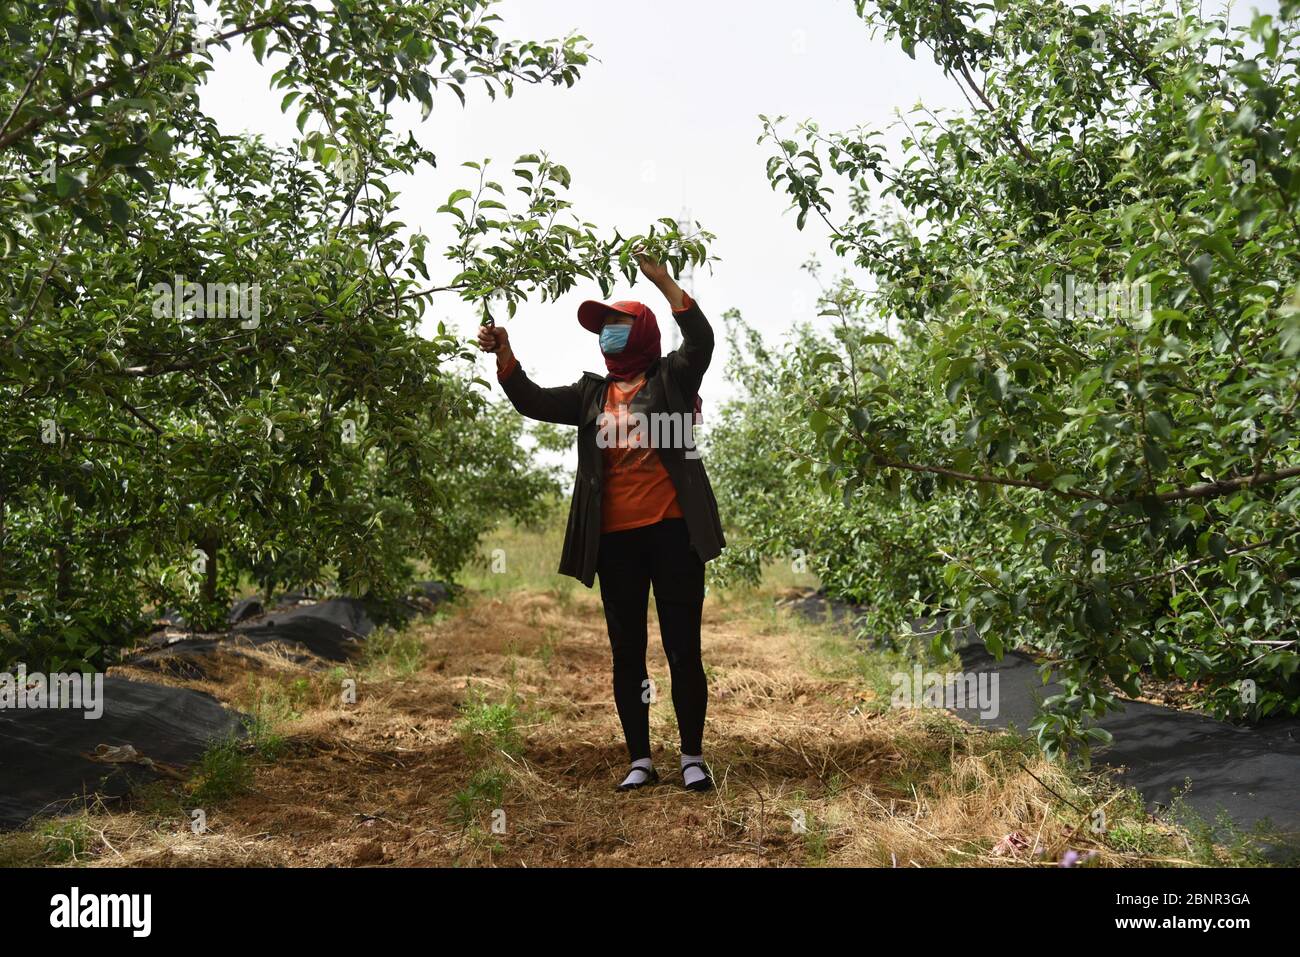 (200516) -- JUXIAN COUNTY, May 16, 2020 (Xinhua) -- Yu Shu'ai tends apple trees in an orchard by the Qingfengling reservoir in Anzhuang Township of Juxian County, Rizhao, east China's Shandong Province, May 12, 2020. When Yu Shu'ai lost her husband in 2012, life turned downright hard -- the medical bills had drained all her family savings, leaving Yu and her son in financial strain. In 2014, when the local government of Anzhuang invited Yu to join one of the township's poverty alleviation projects, her living conditions began to improve. To help impoverished people shake off poverty, An Stock Photo